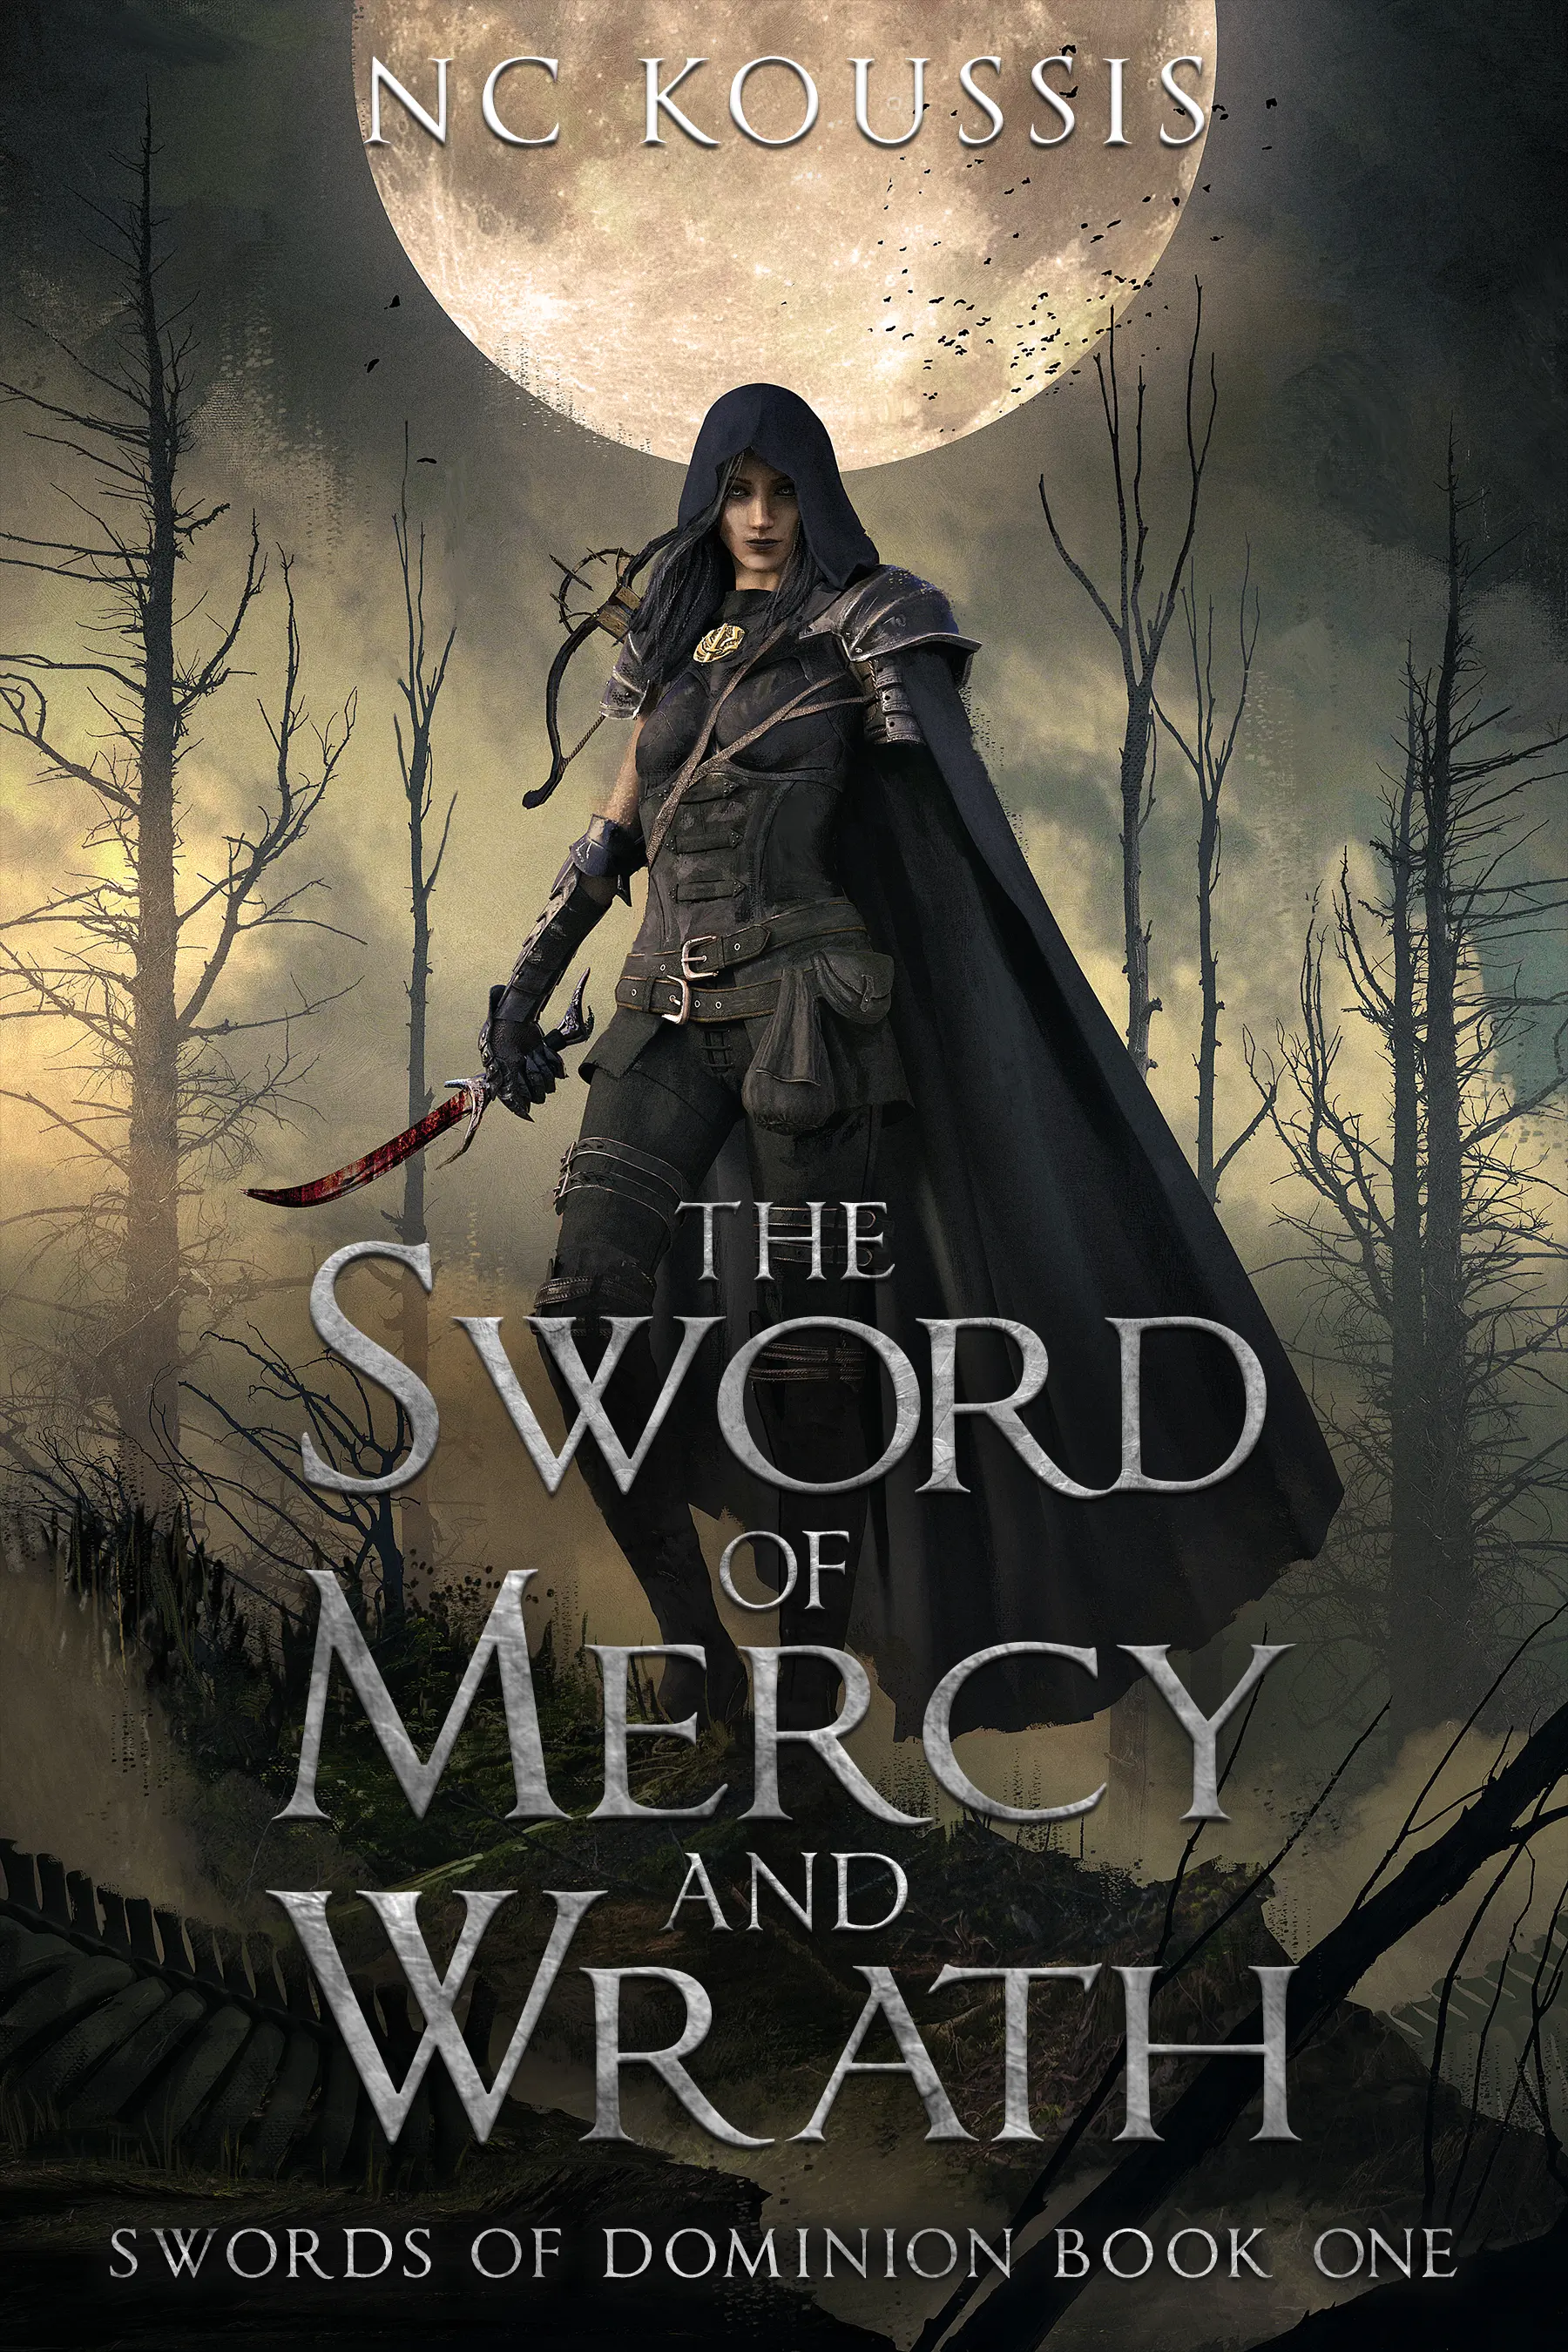 The Sword of Mercy and Wrath